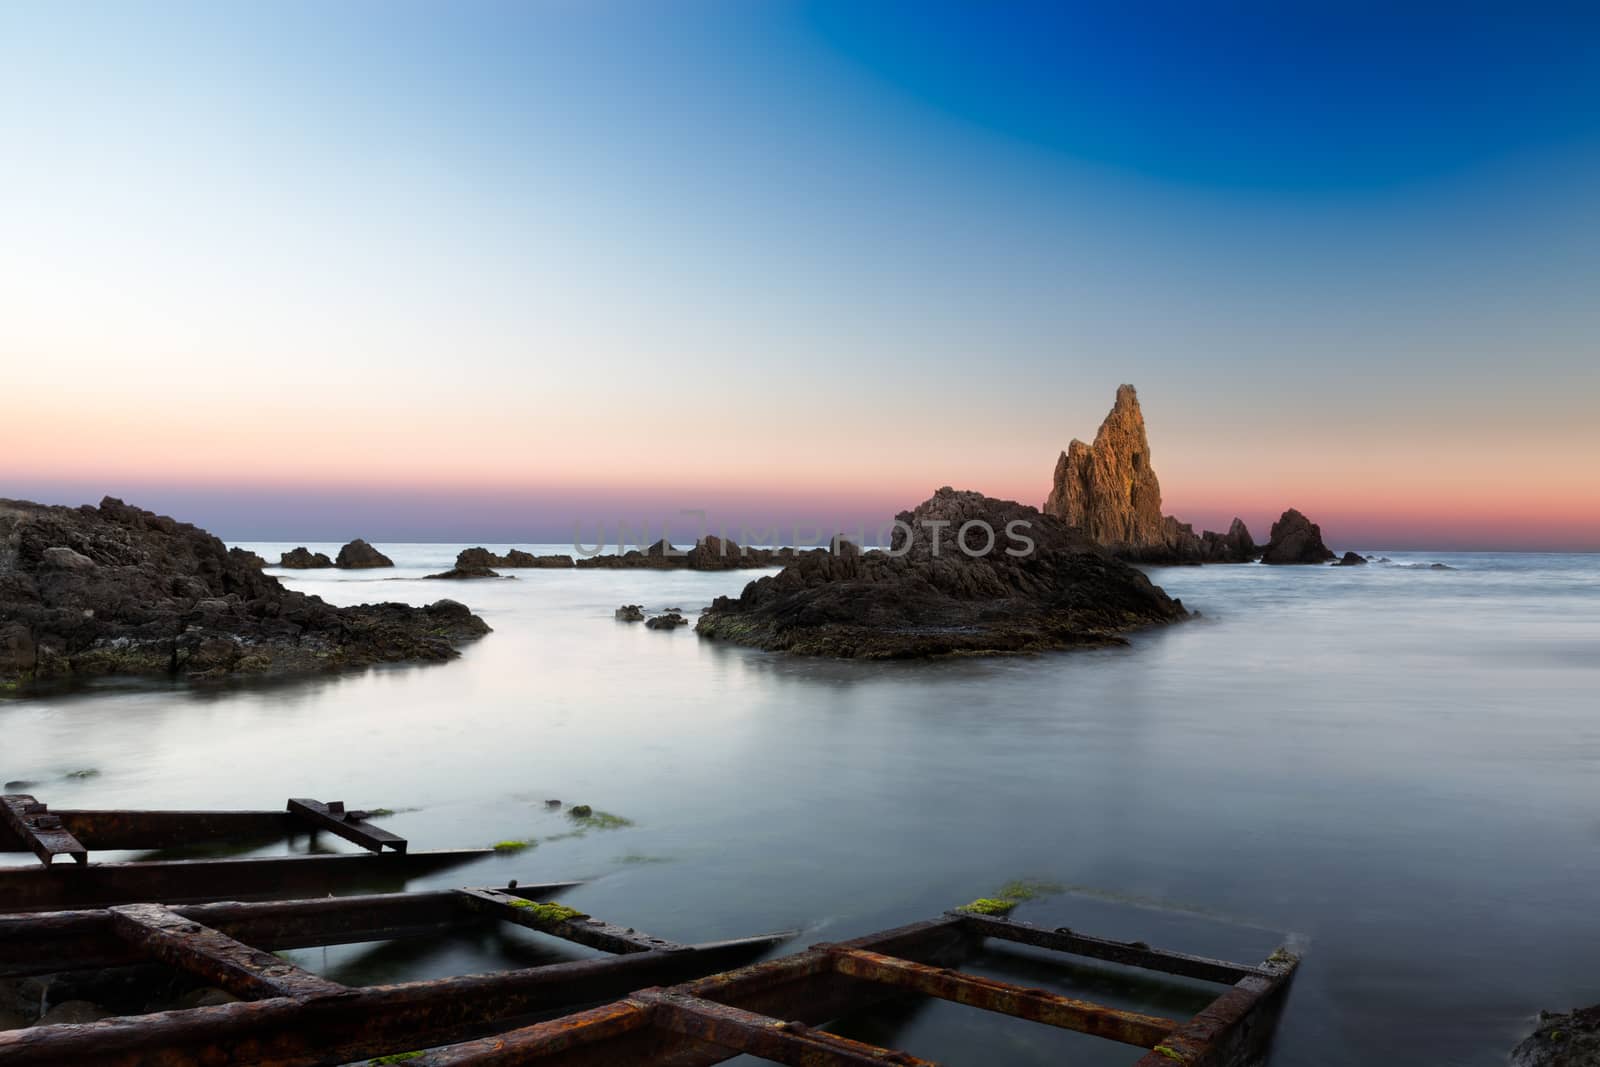 Sea after sunset at Cabo del Gata, Almeria, Spain by fisfra